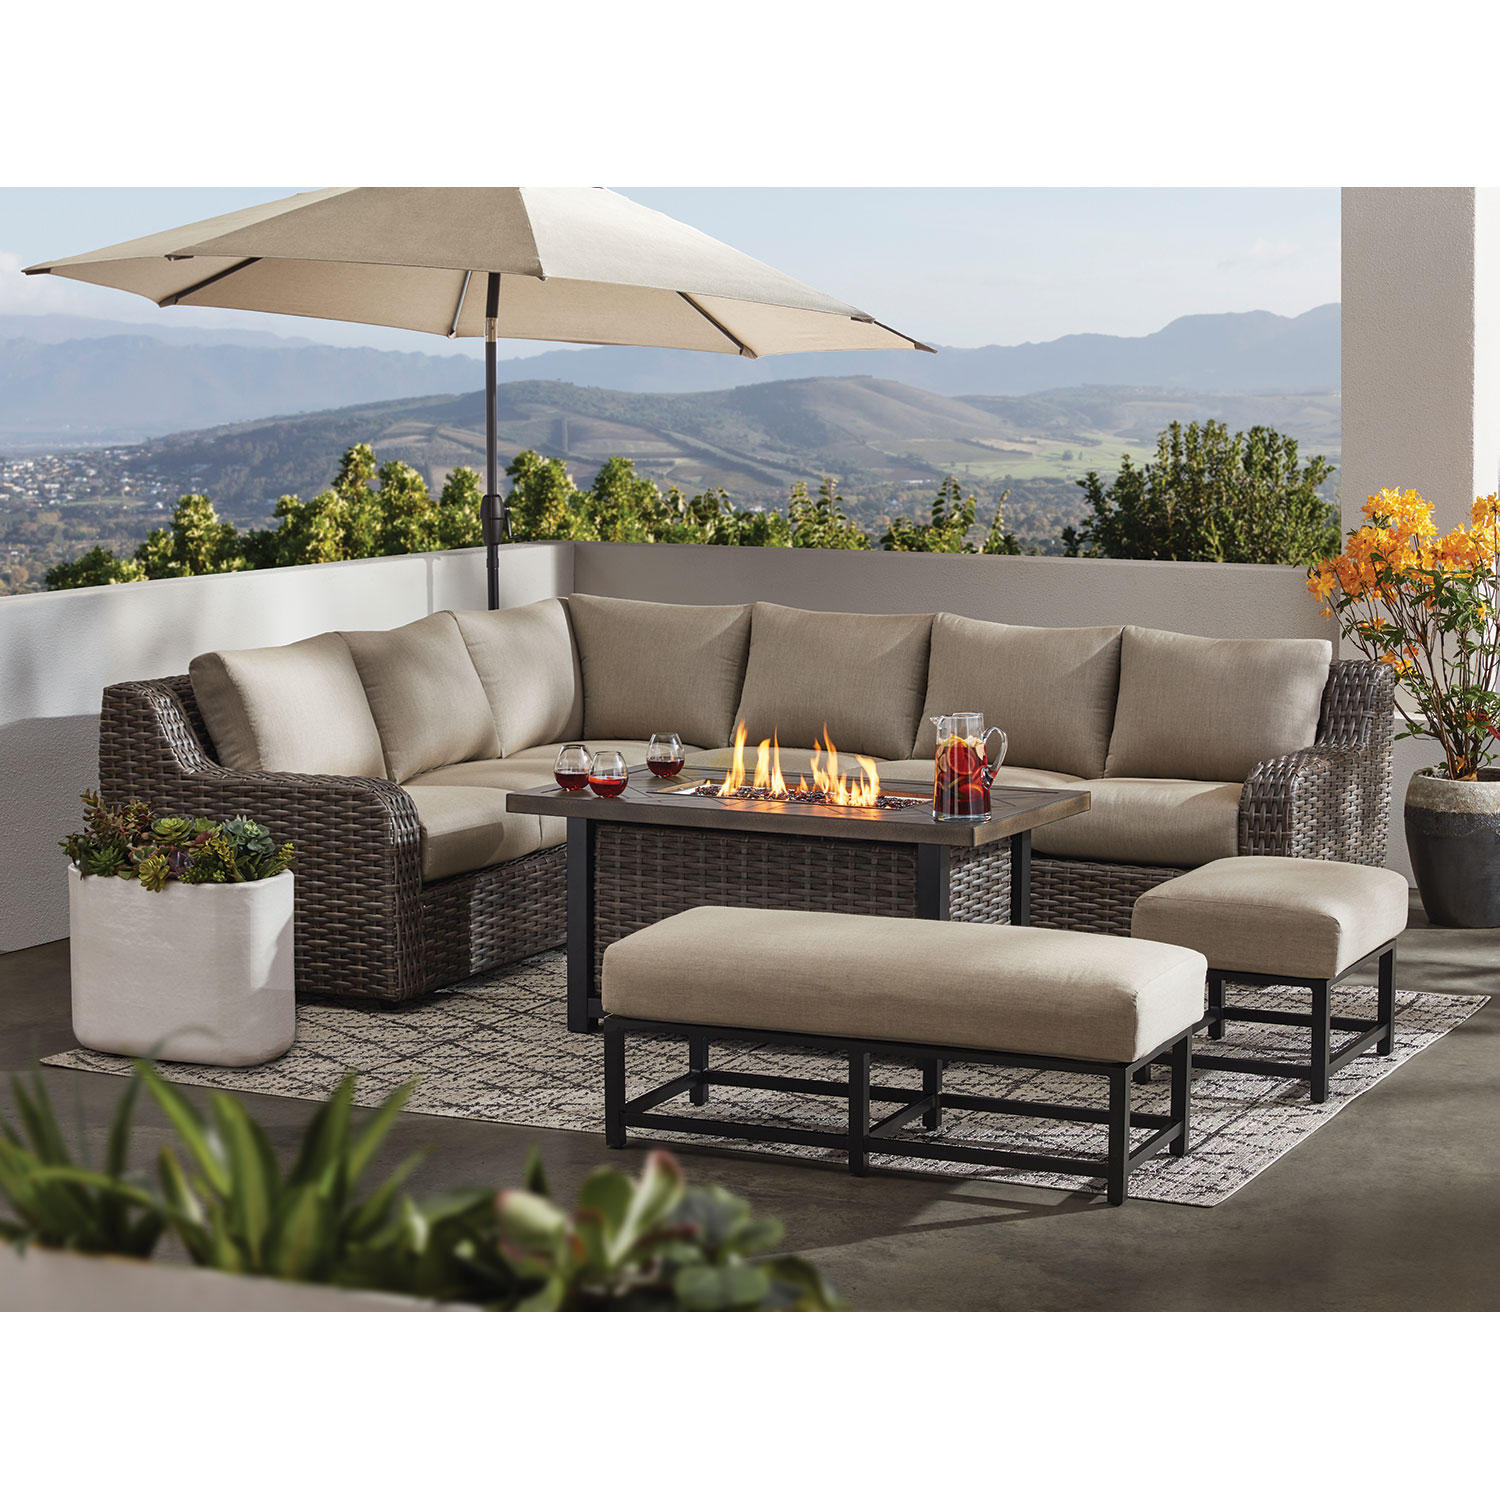 Member’s Mark Athena 7-Piece Patio Sectional Sofa with Firepit